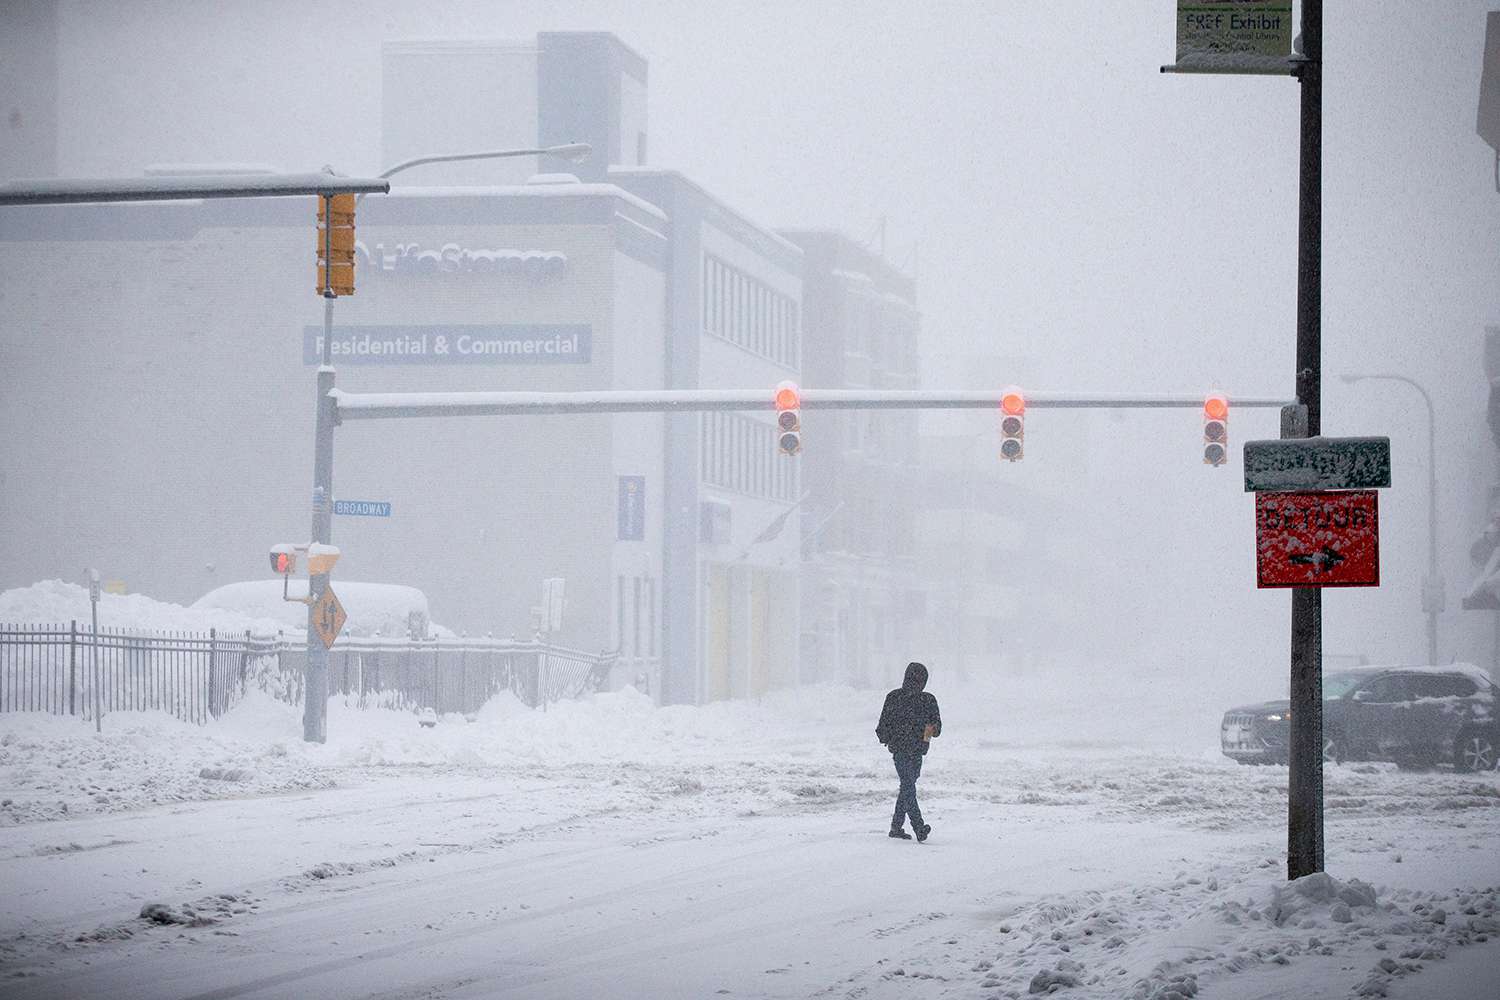 Person crosses Ellicott Street as snow falls, in Buffalo, N.Y. A dangerous lake-effect snowstorm paralyzed parts of western and northern New York, with nearly 2 feet of snow already on the ground in some places and possibly much more on the way